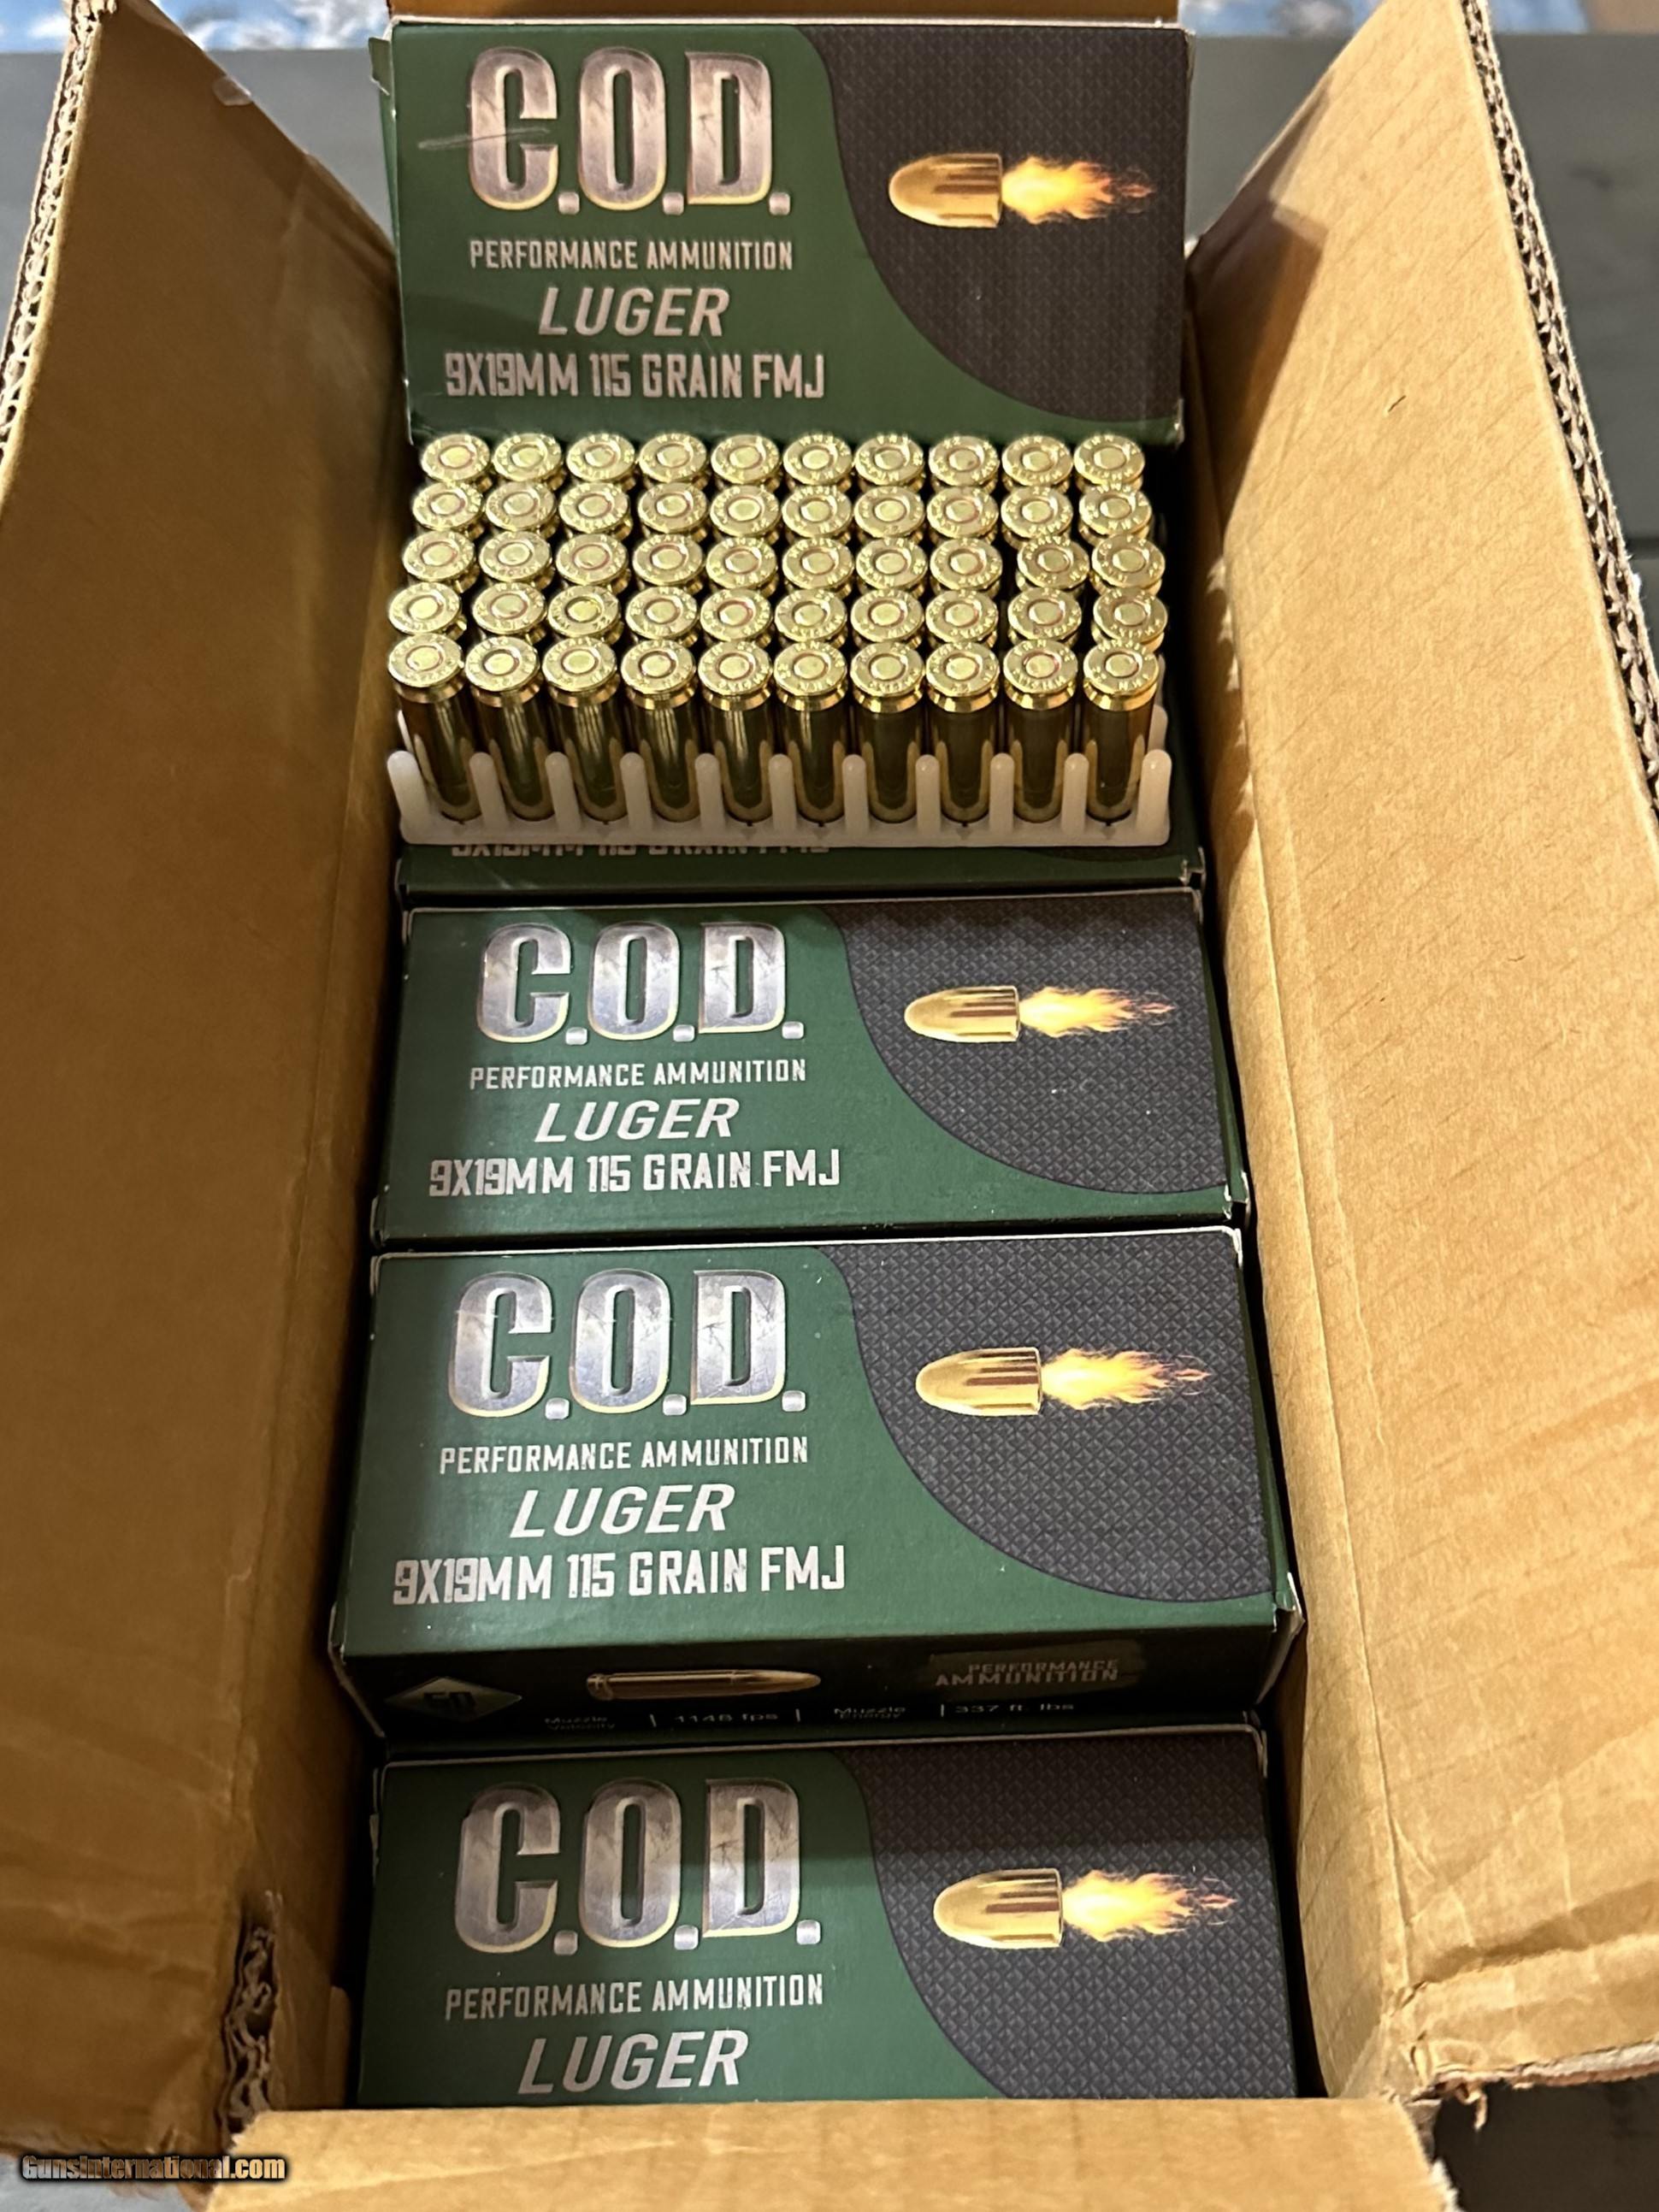 TURAN 9mm Brass Cased FMJ 115 Grain Case of 1,000 Rounds – NEW BRASS – Not  Just Ammo